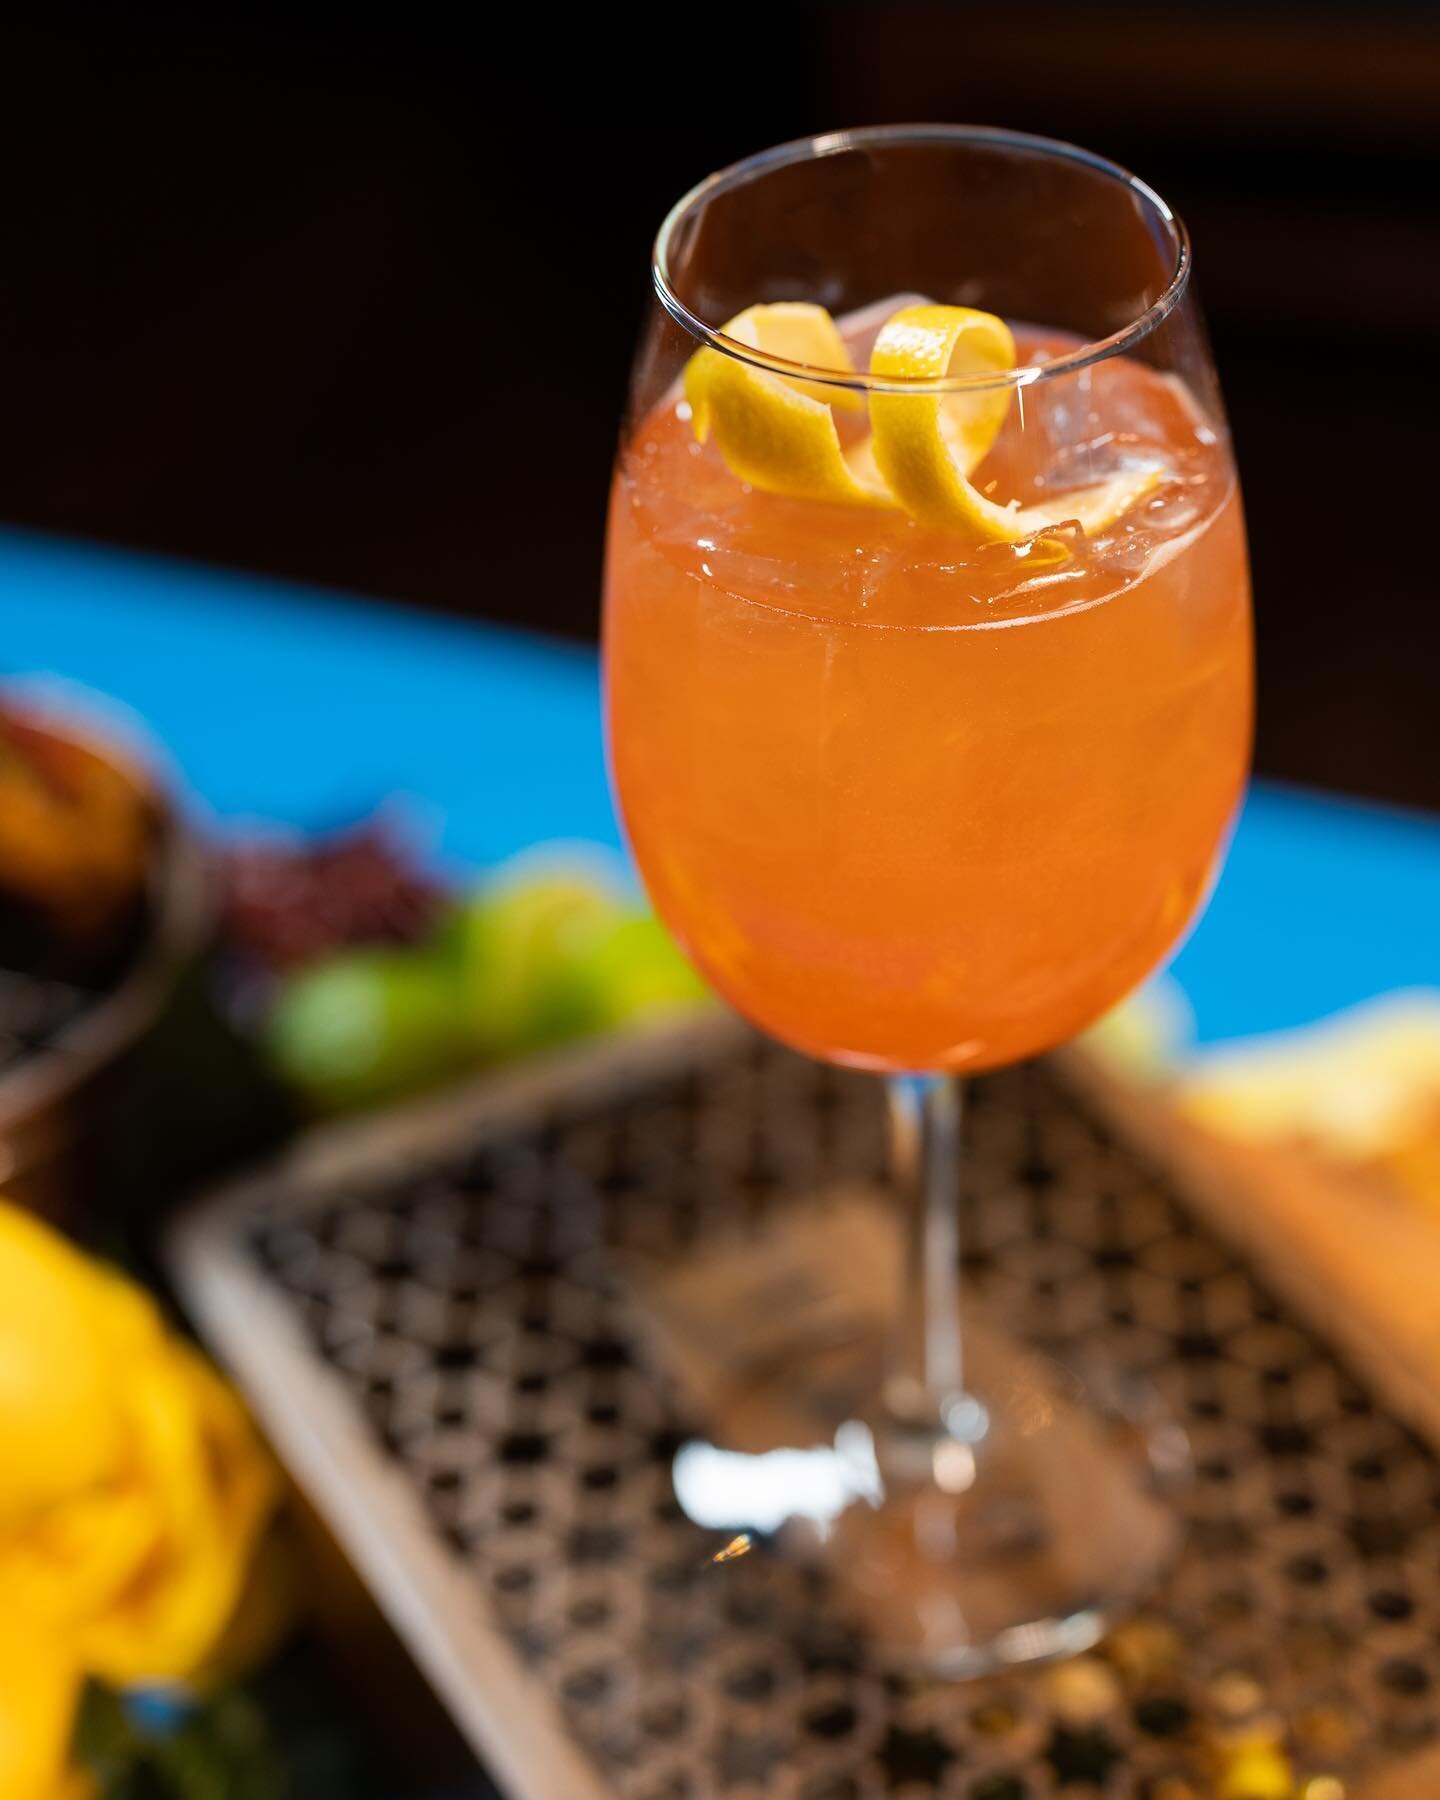 Time flies when you are having a cocktail!

Call +1 646-861-3859 for reservations
.
.
.
#BaaziNYC&nbsp;#nyc&nbsp;#indianrestaurant&nbsp;#instagramworthy#beautifuldecor&nbsp;#indianrestaurantinnyc#indianfood&nbsp;#nycrestaurants&nbsp;#modernindian#eat